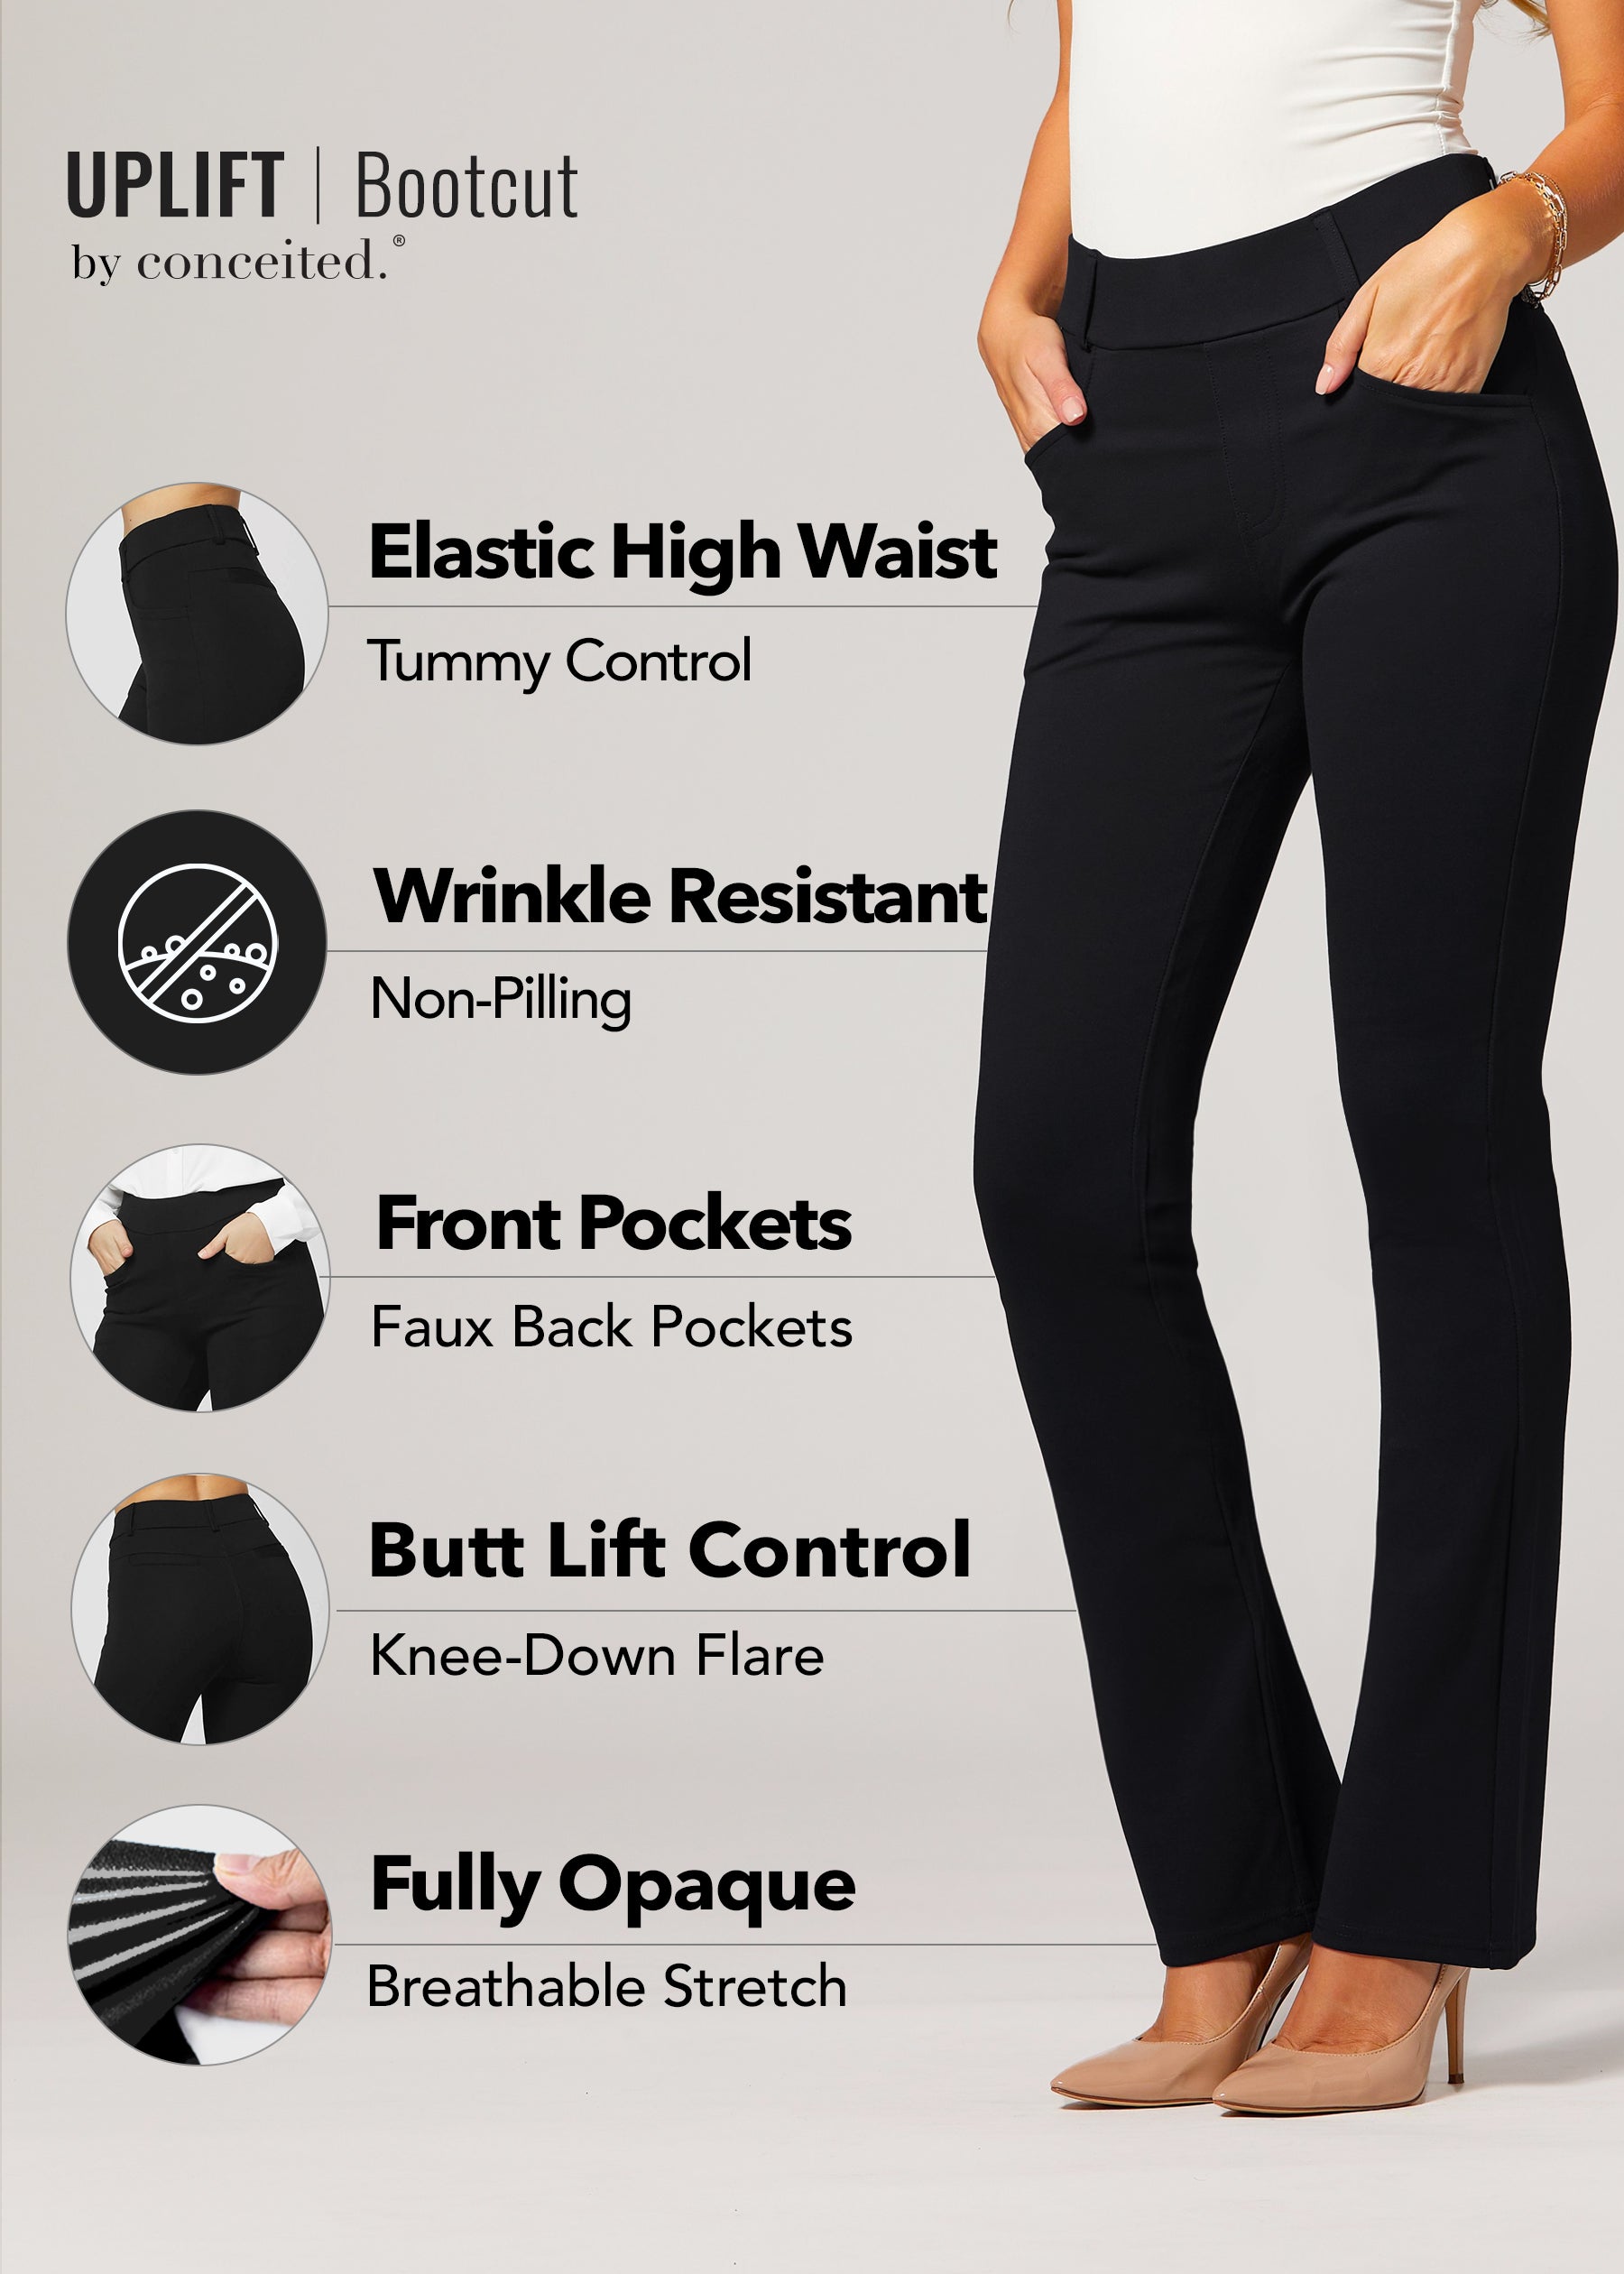 Womens Soft Stretch Ponte Trousers with Pockets